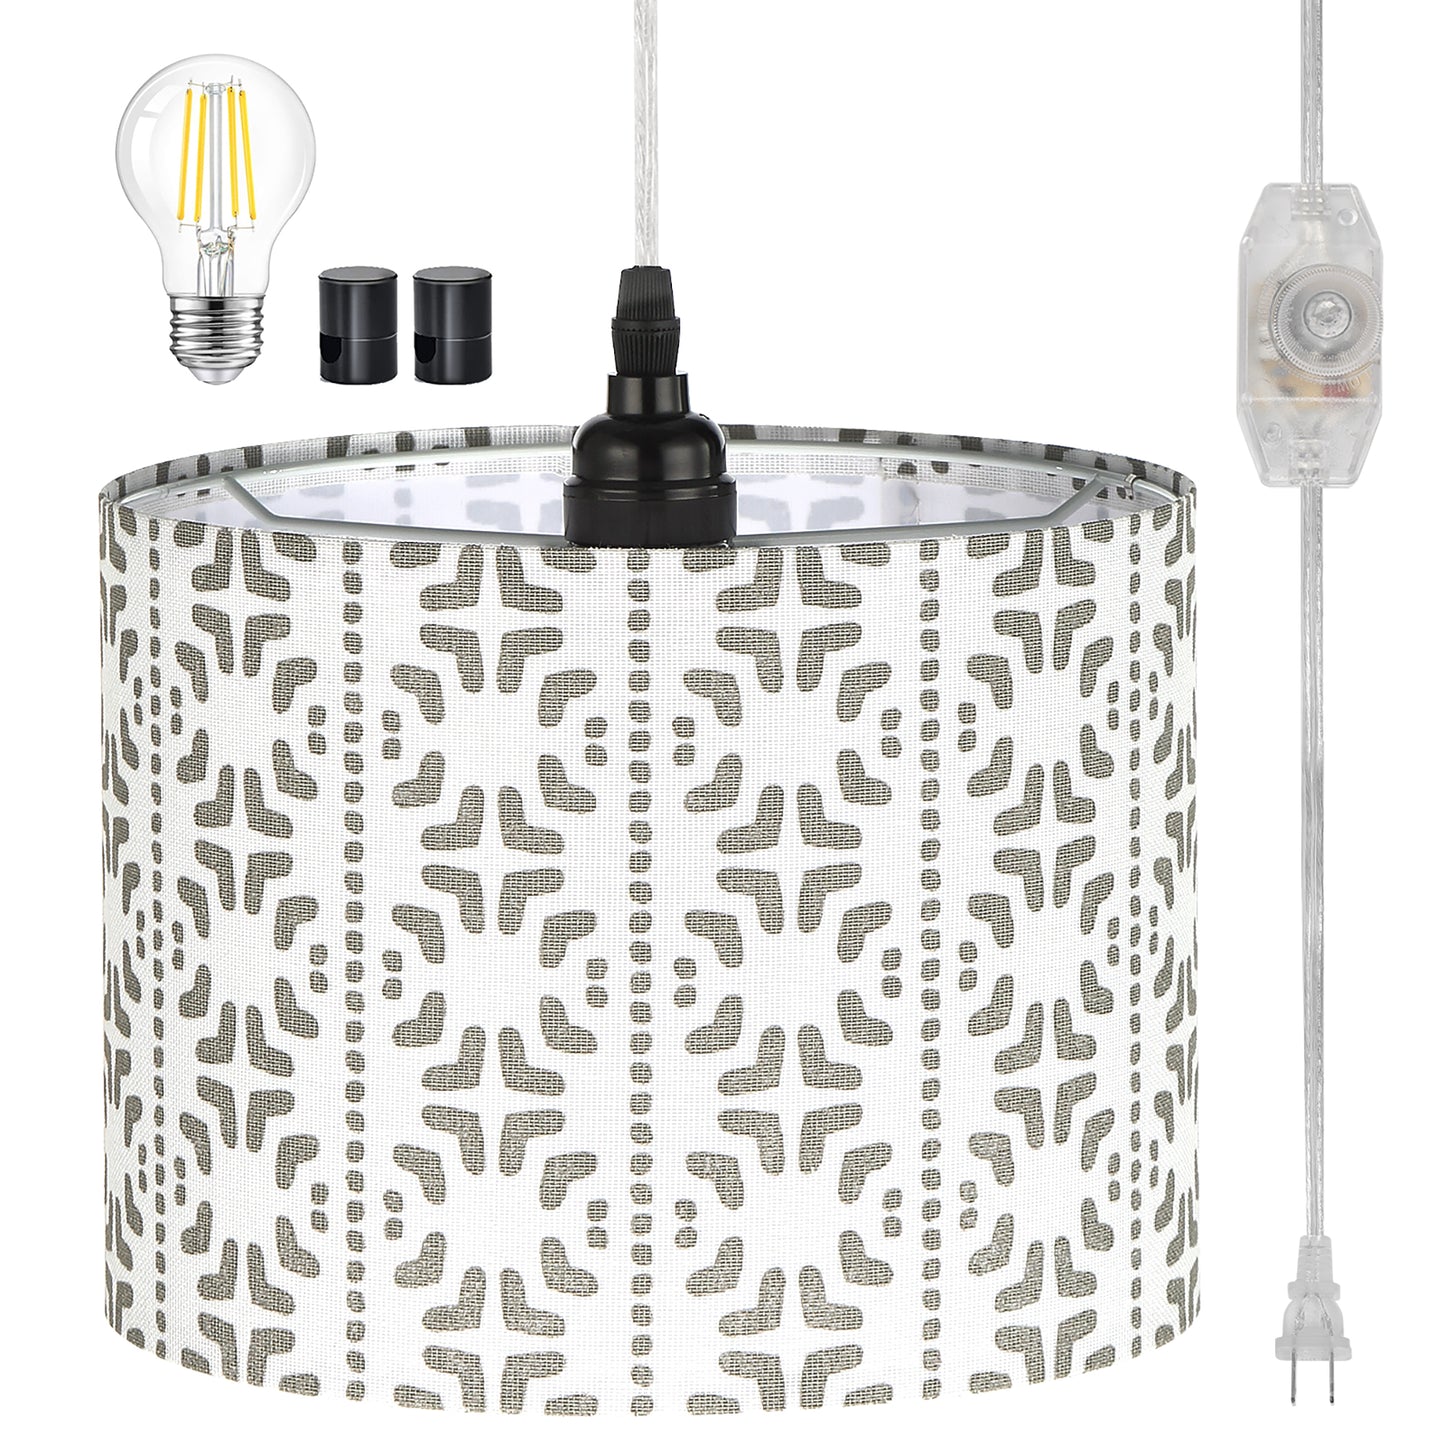 Drum-Shaped Pendant Light with Adjustable Length, Multi-Directional Illumination, and Dimming